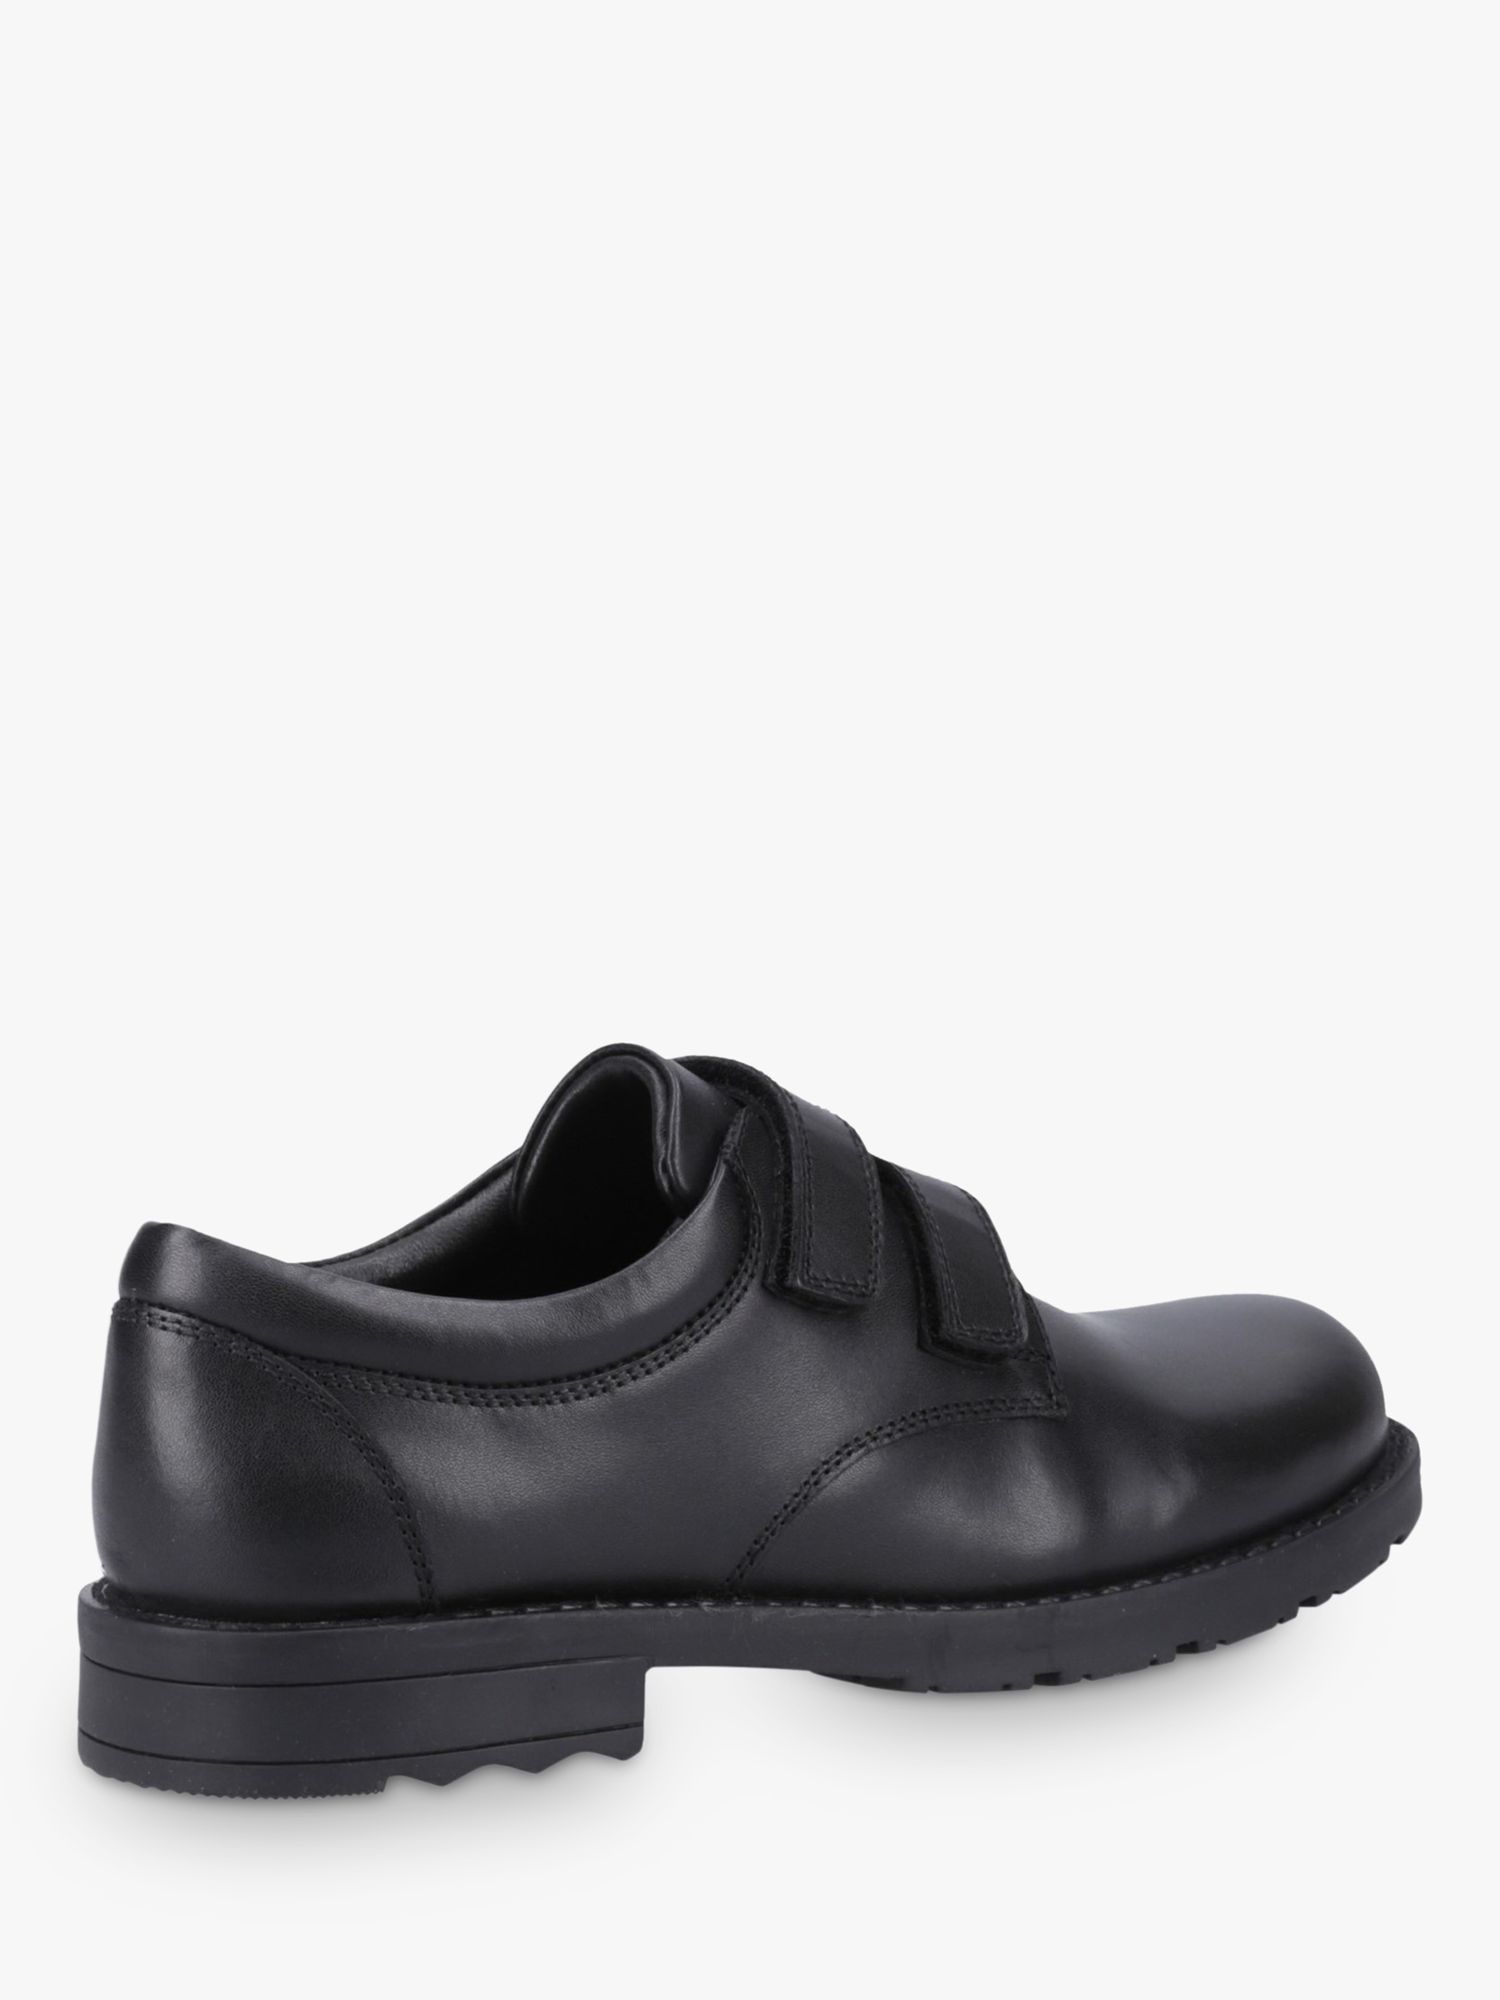 Hush Puppies Kids' Barry Junior Leather Rip Tape Shoes, Black, 13 Jnr